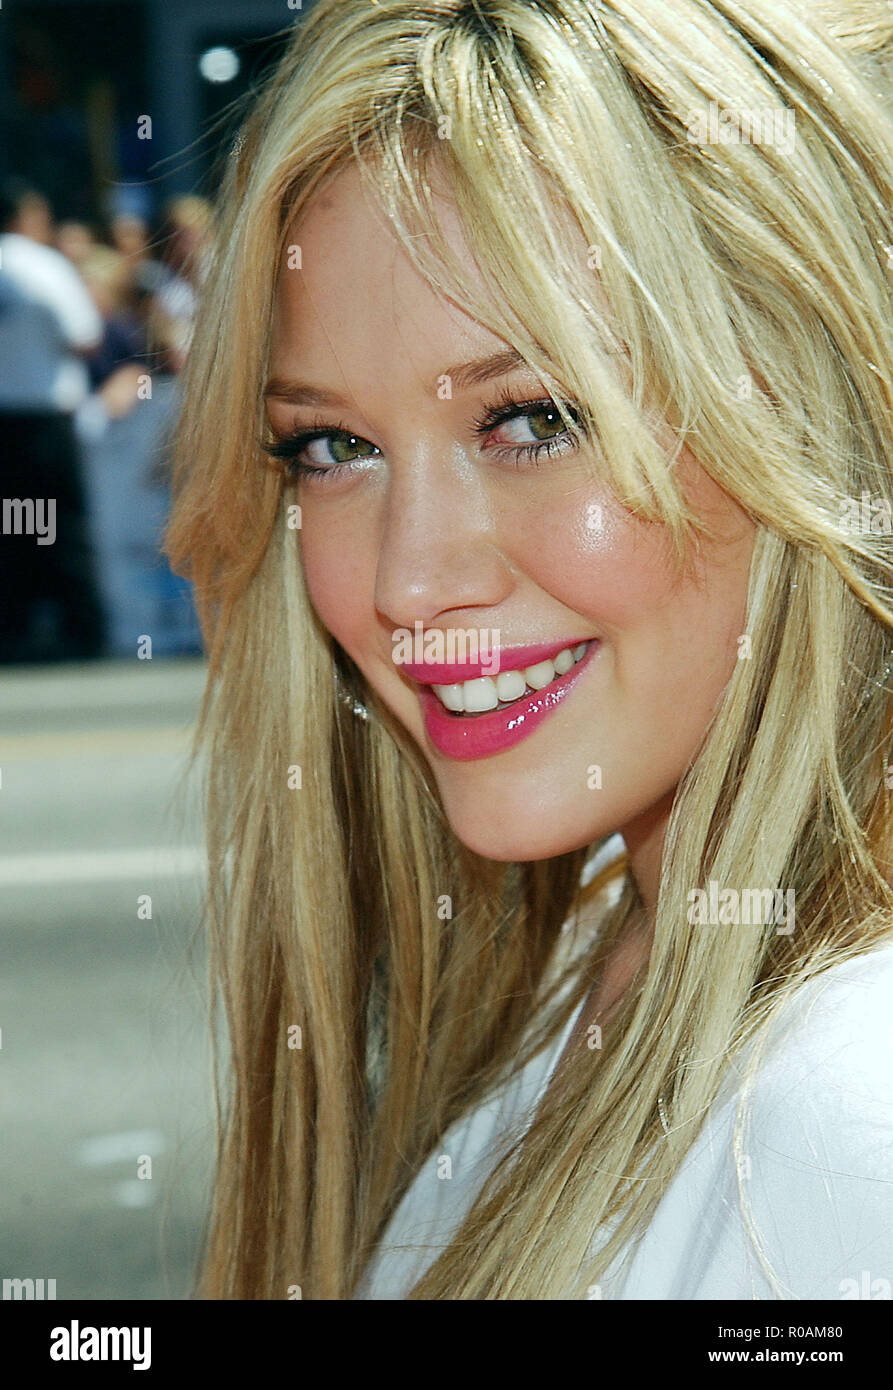 Hilary Duff arriving at a Cinderella Story Premiere at the Chinese Theatre in Los Angeles. July 10, 2004DuffHilary181 Red Carpet Event, Vertical, USA, Film Industry, Celebrities,  Photography, Bestof, Arts Culture and Entertainment, Topix Celebrities fashion /  Vertical, Best of, Event in Hollywood Life - California,  Red Carpet and backstage, USA, Film Industry, Celebrities,  movie celebrities, TV celebrities, Music celebrities, Photography, Bestof, Arts Culture and Entertainment,  Topix, headshot, vertical, one person,, from the year , 2004, inquiry tsuni@Gamma-USA.com Stock Photo